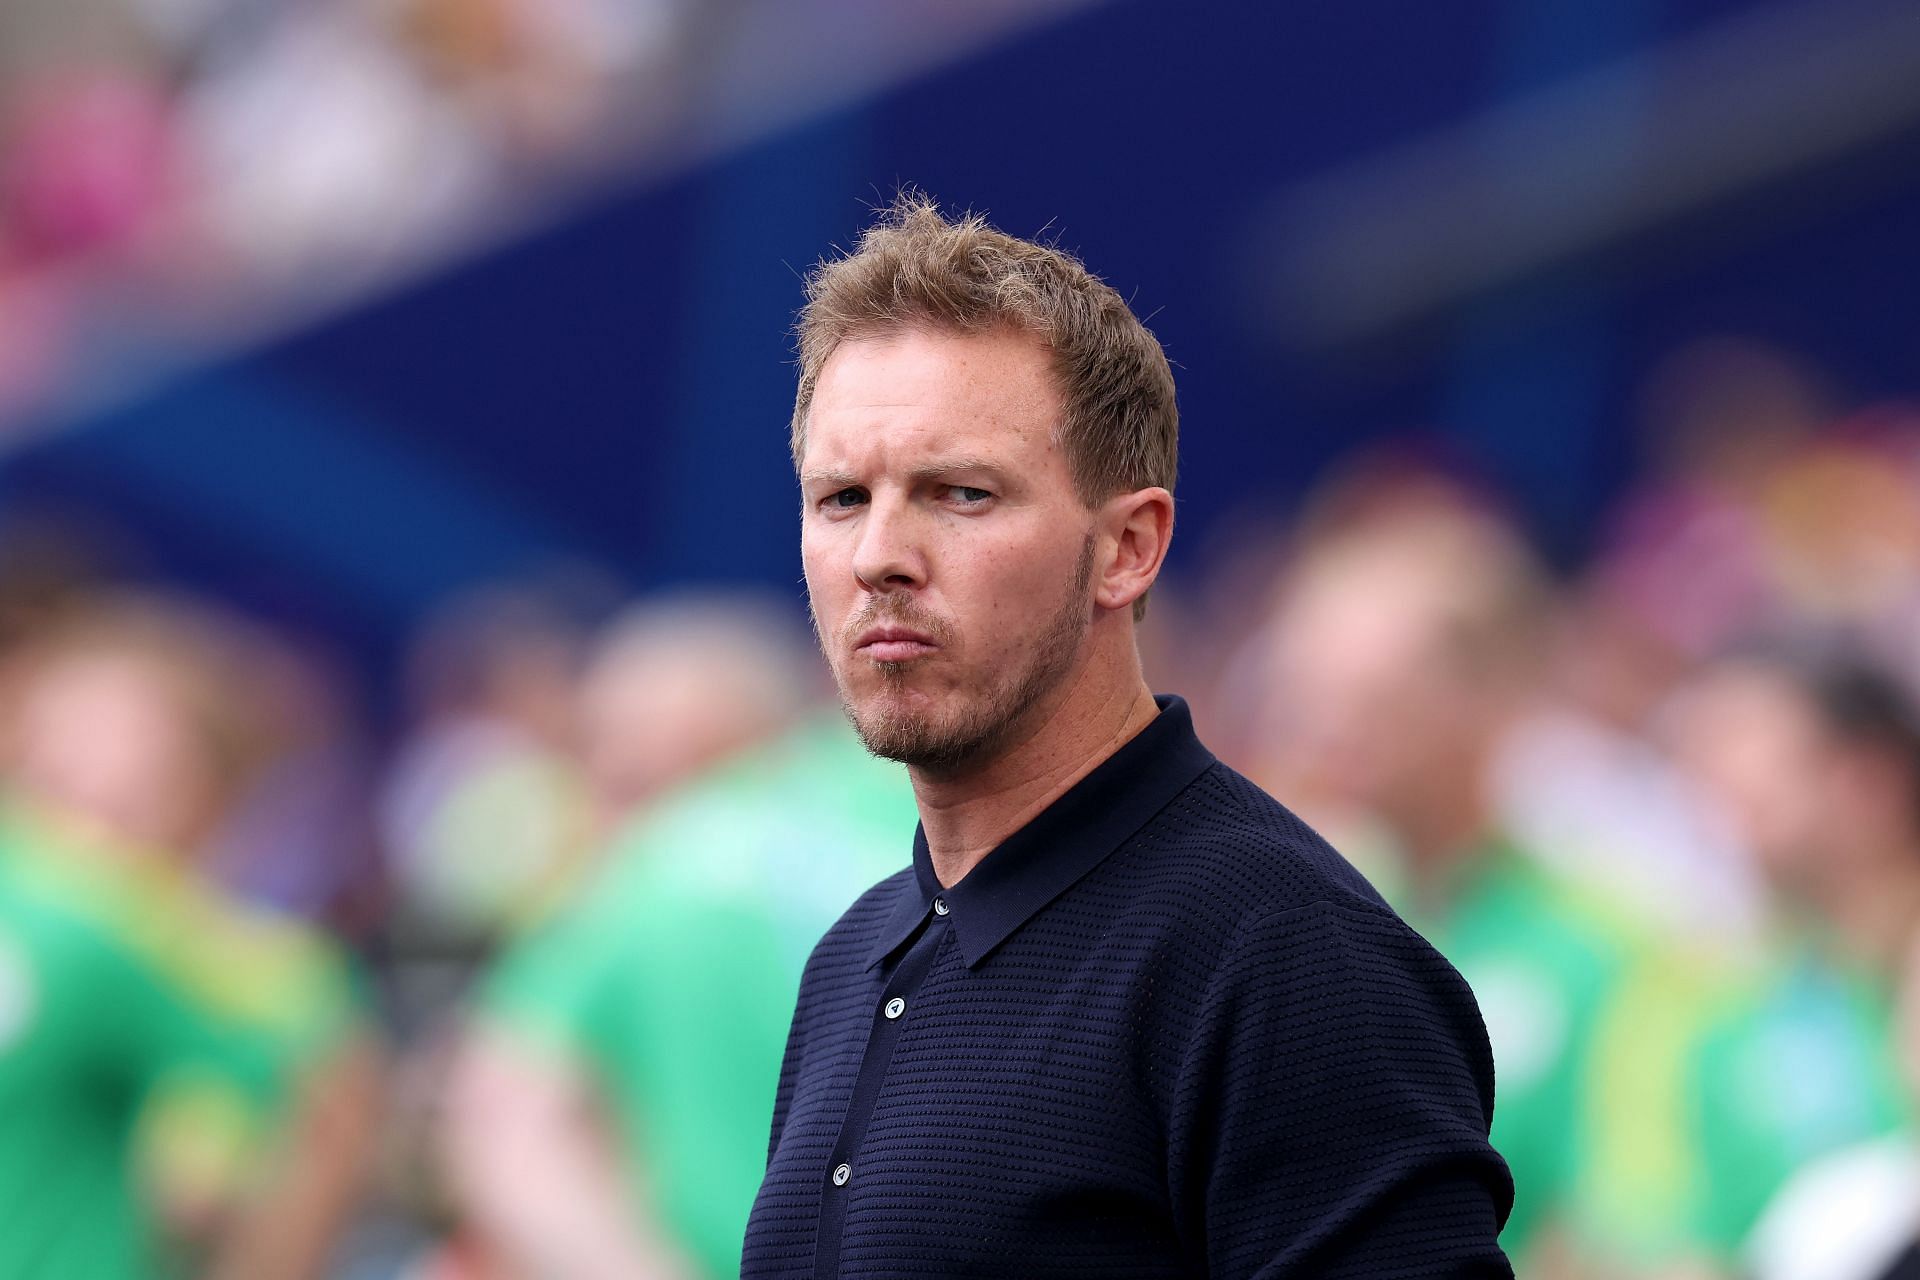 “We now have to wait 2 years to become world champions” - Julian Nagelsmann explains what 'hurts' him about Germany crashing out of Euro 2024